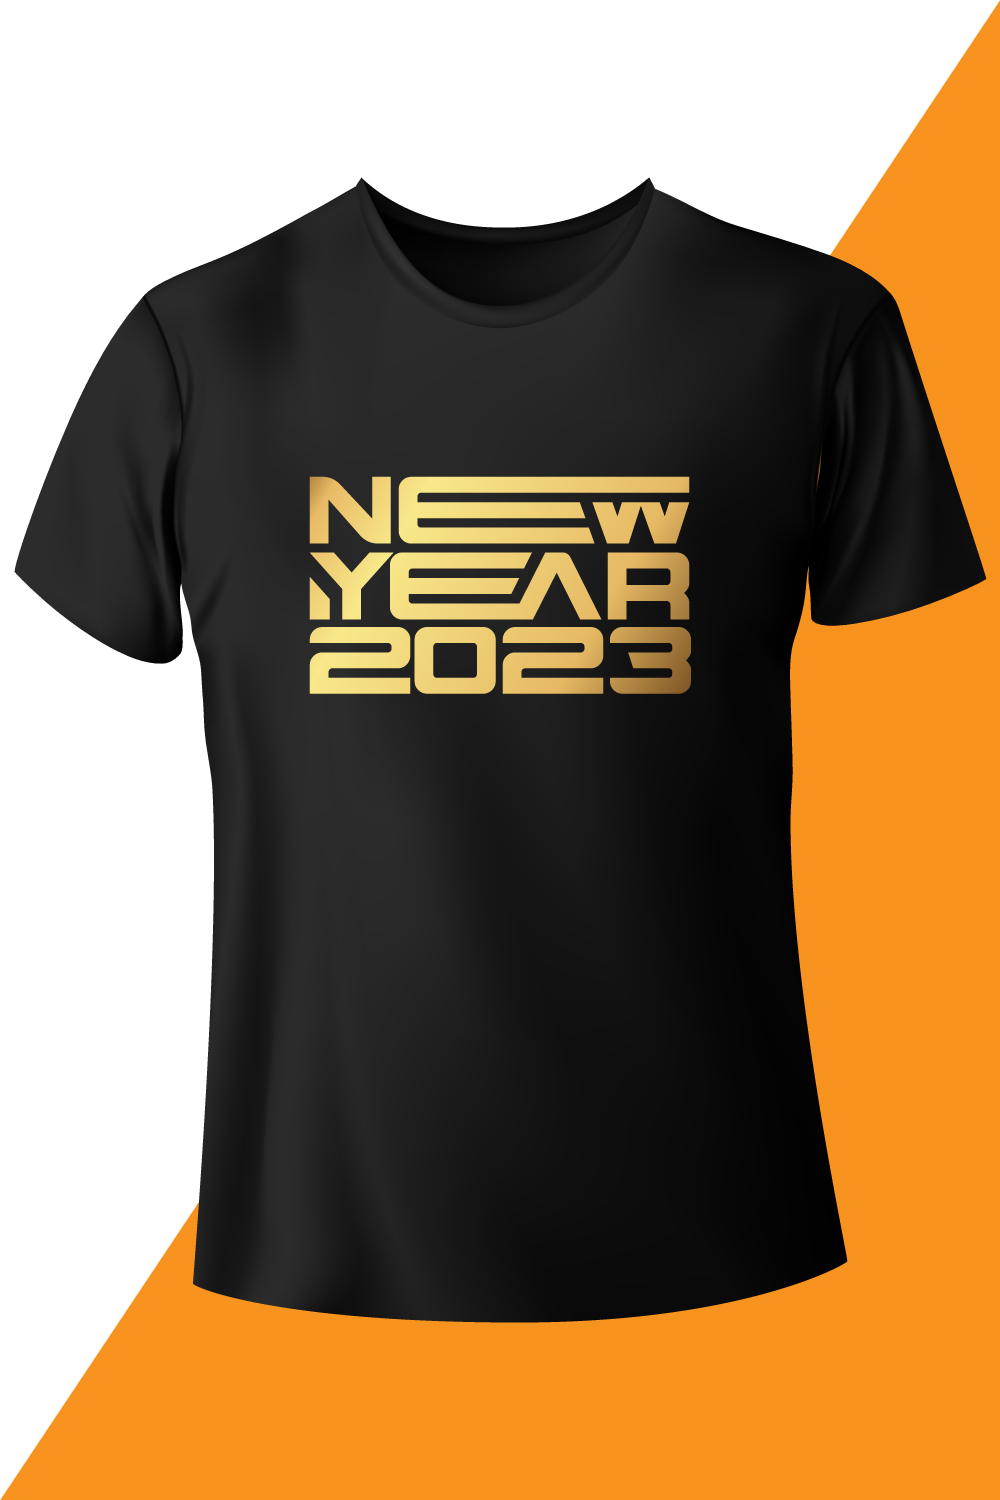 Picture of a black T-shirt with a unique New Year 2023 print.